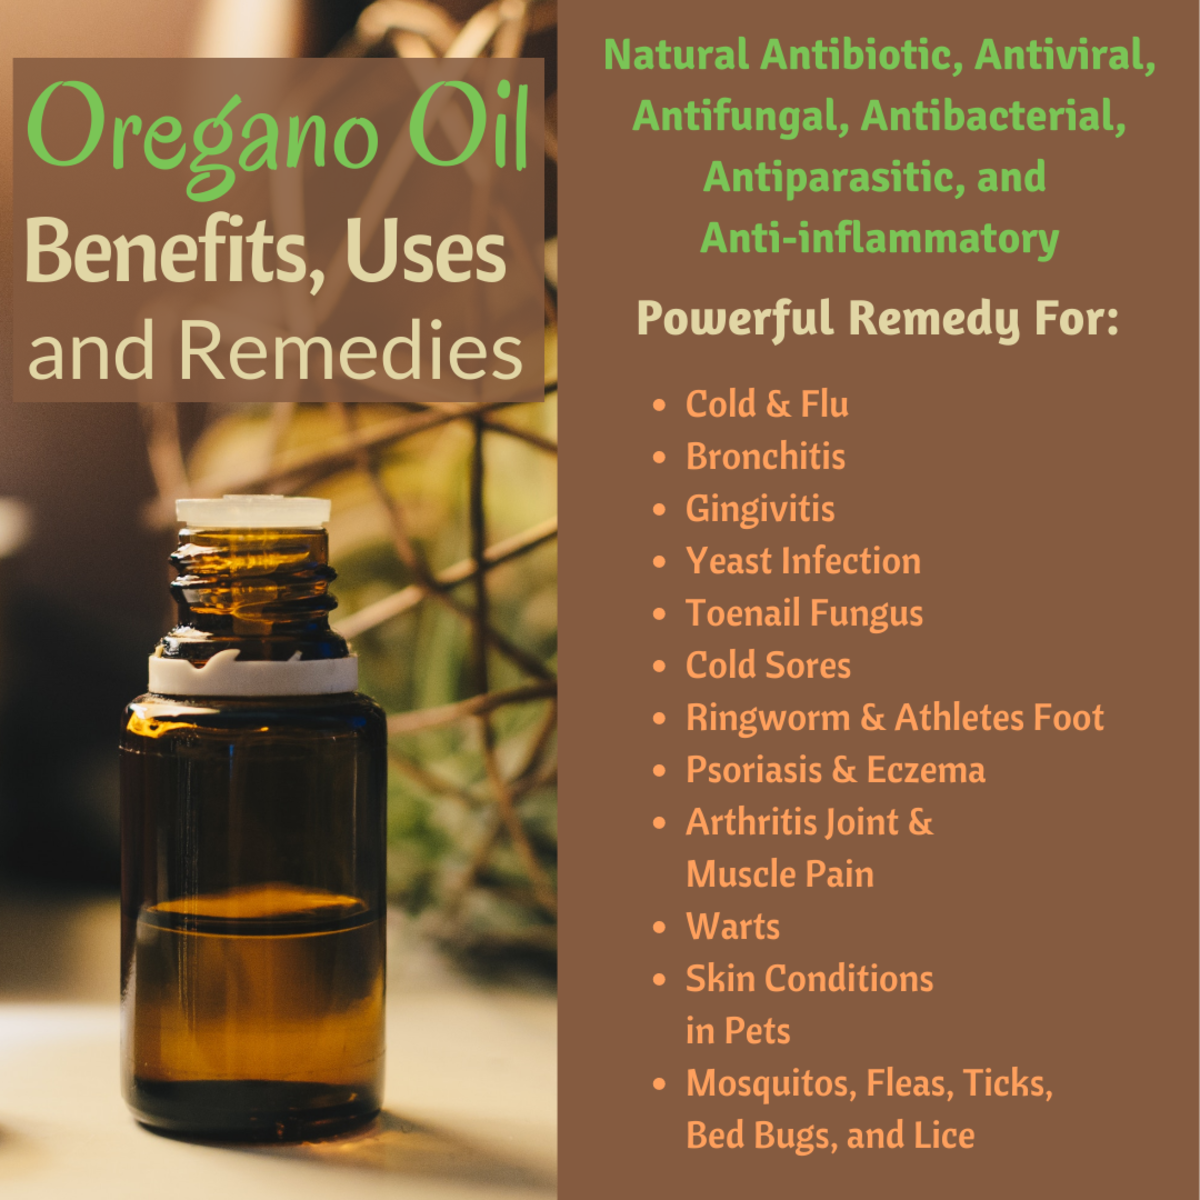 There are a surprising number of uses for Oregano Oil!